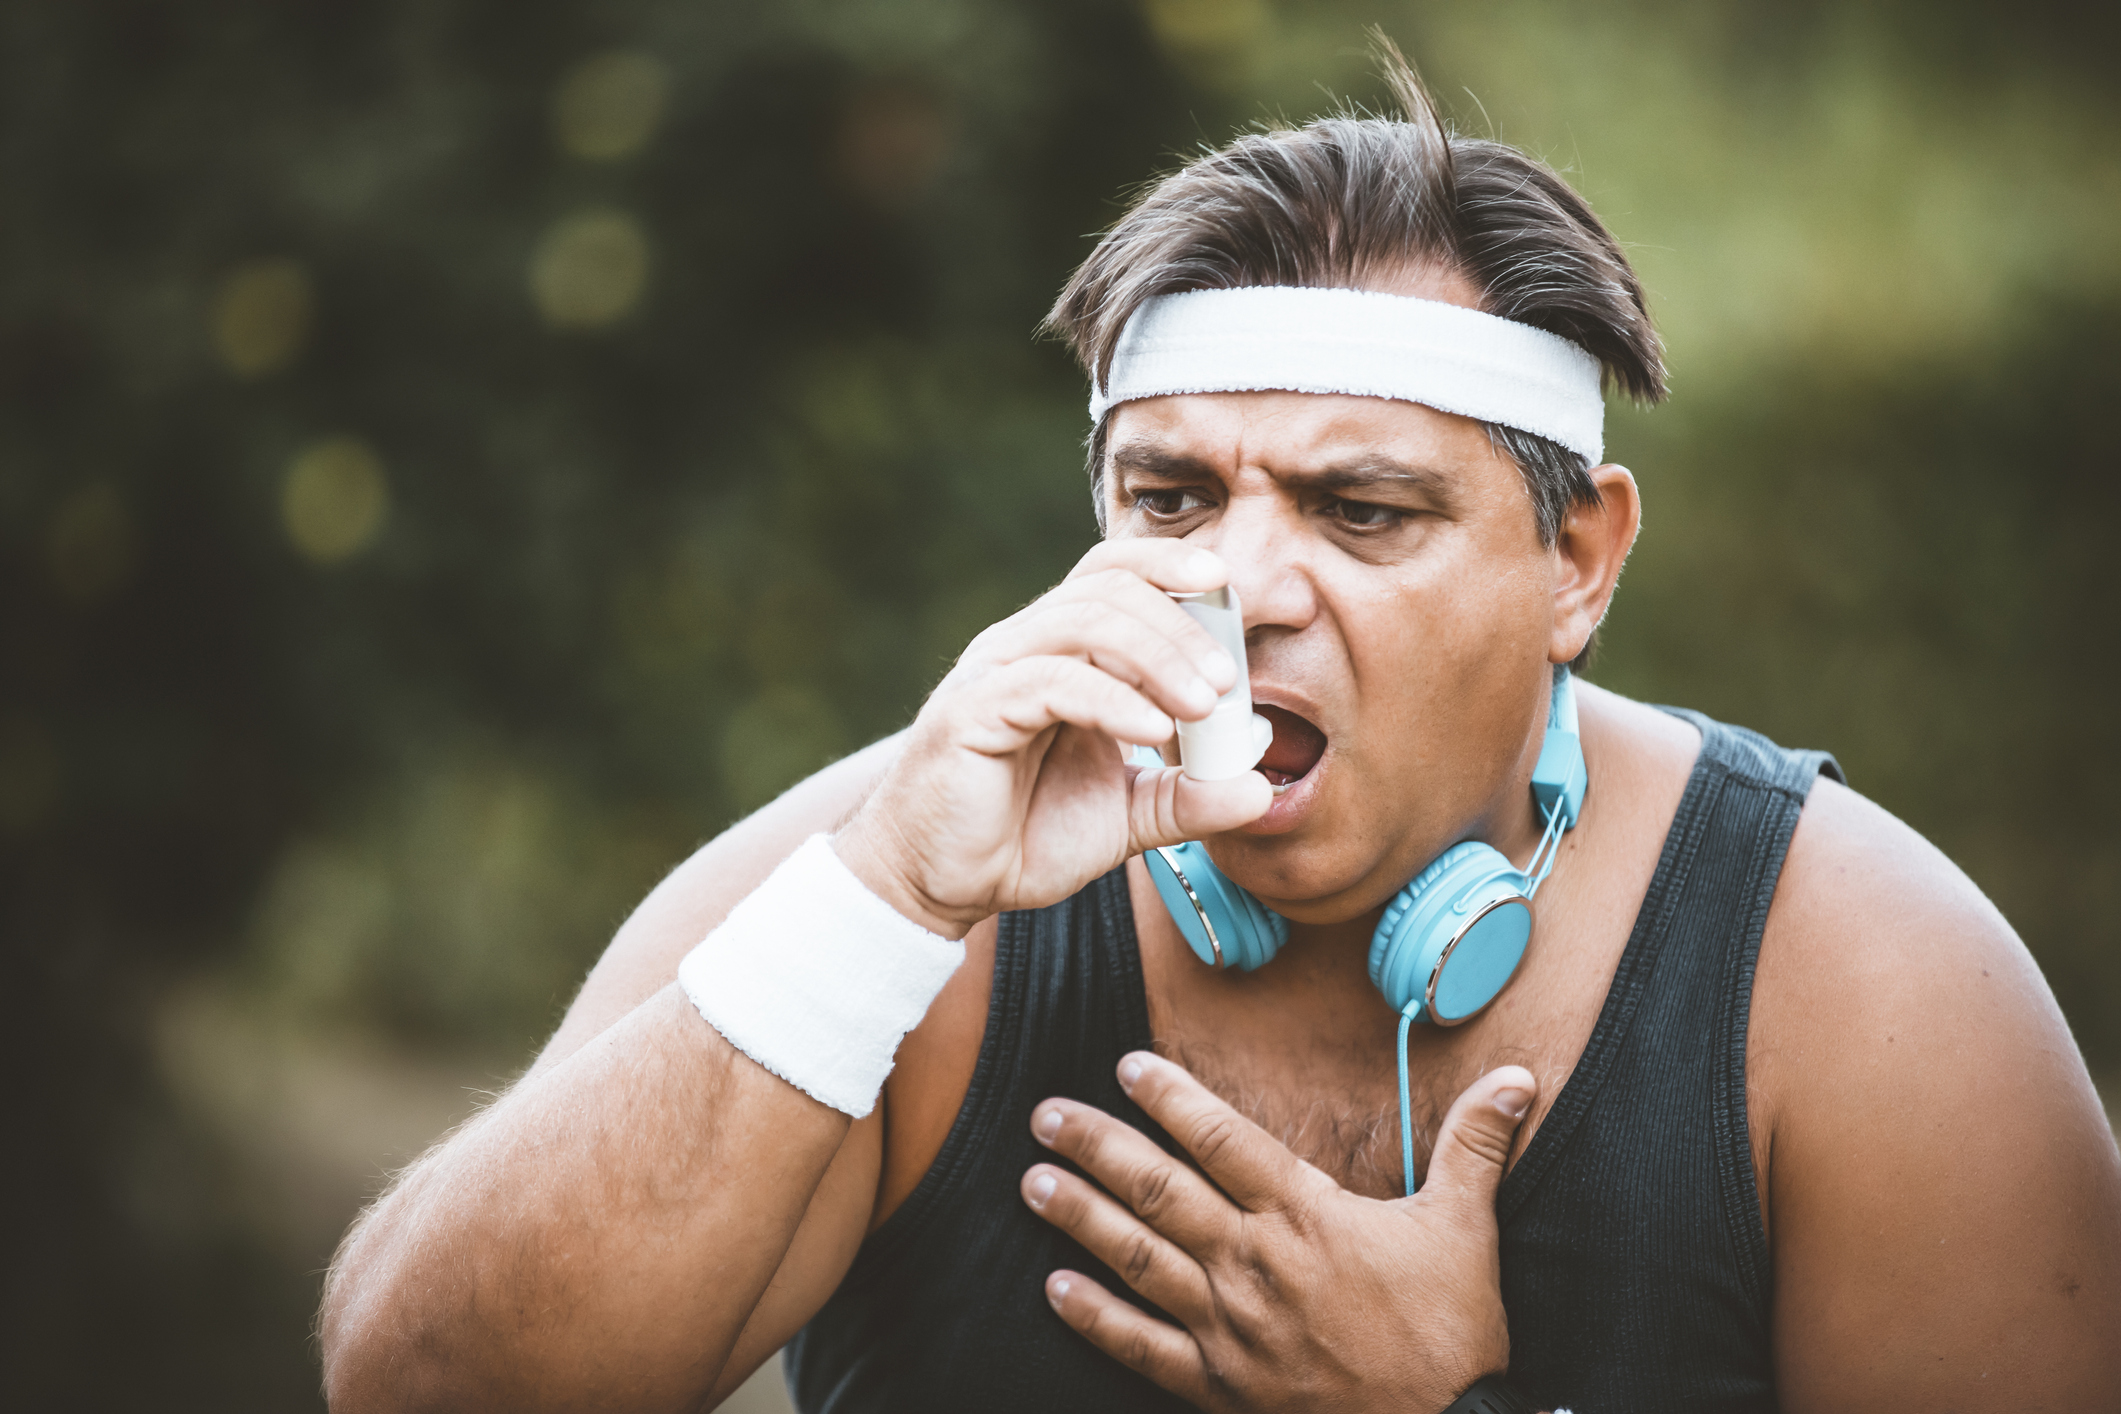 Asthma and Exercise